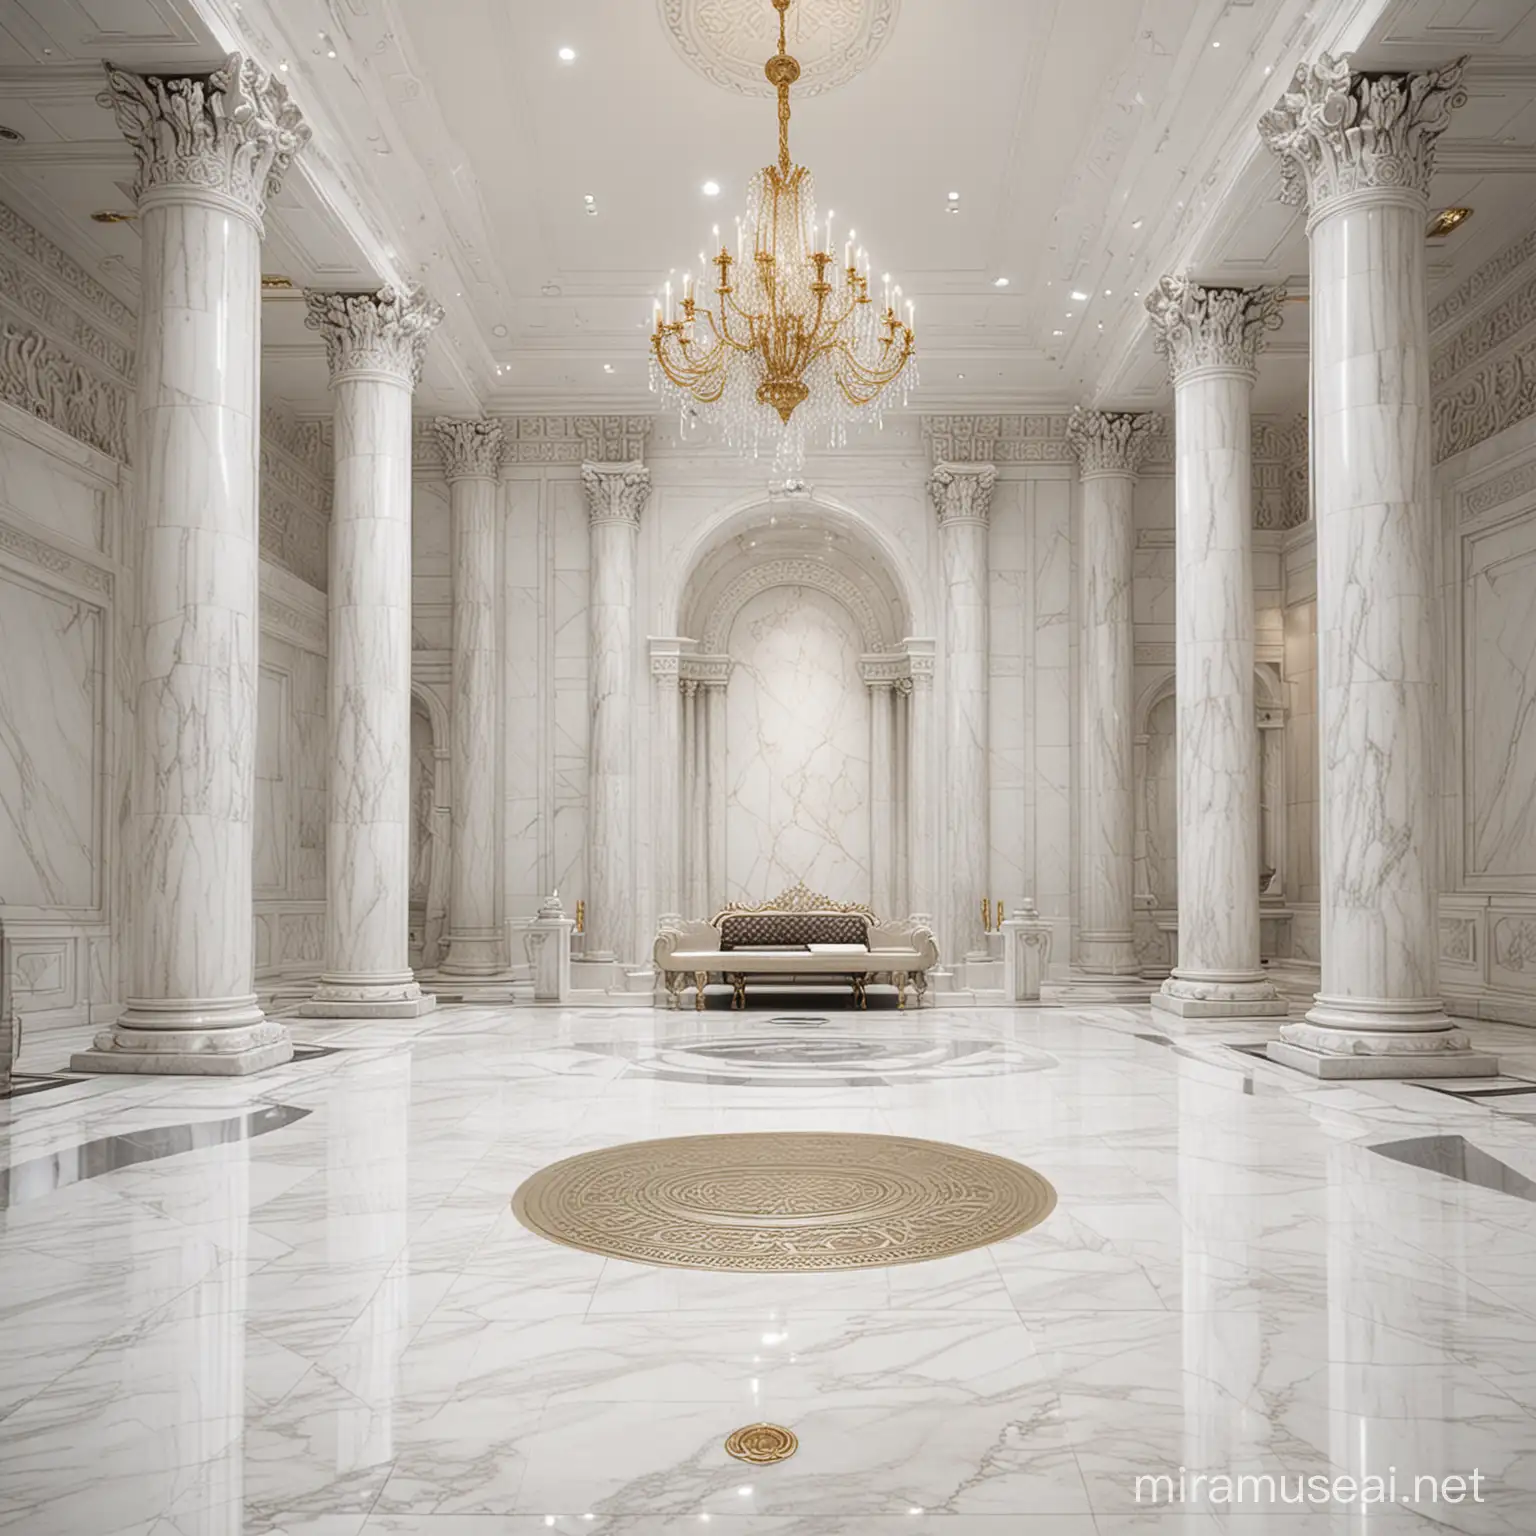 Elegant White Marble Throne Room with Regal Ambiance